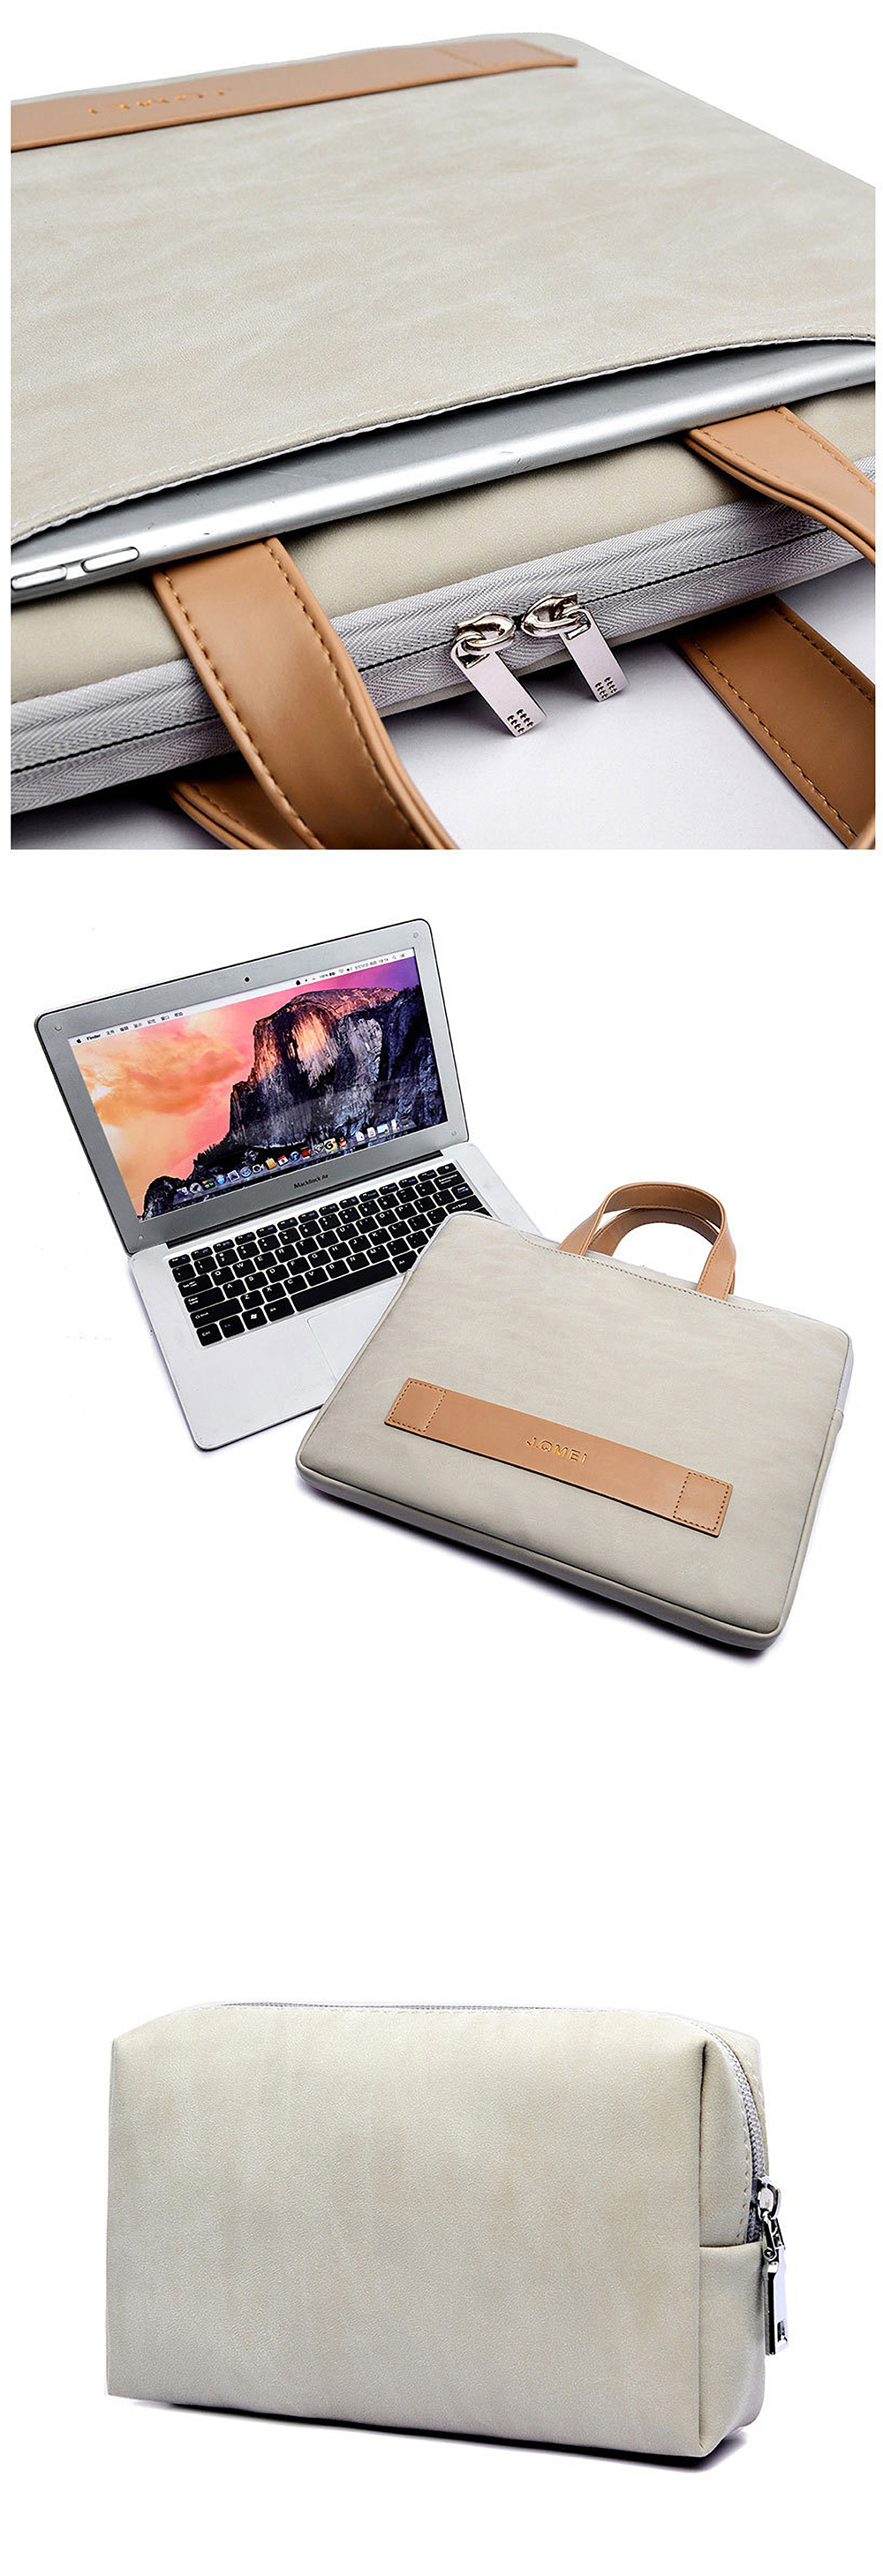 13.3/14 15.6 inch Portable Laptop Bag Waterproof PU Leather Laptop Case Casual Business Handbag for Men and Women